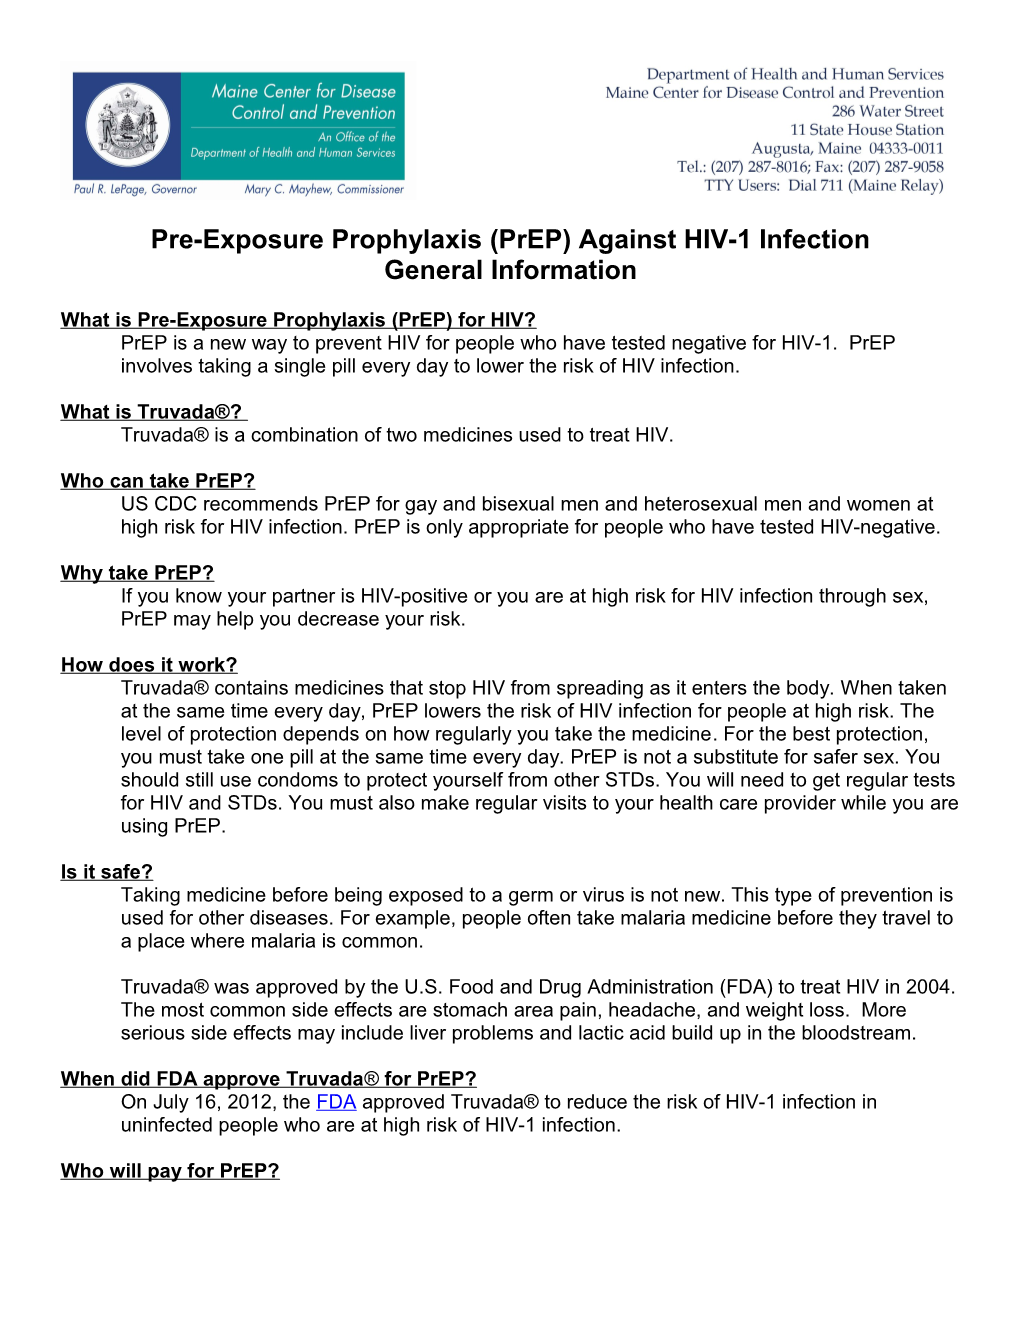 Pre-Exposure Prophylaxis (Prep) Against HIV-1 Infection